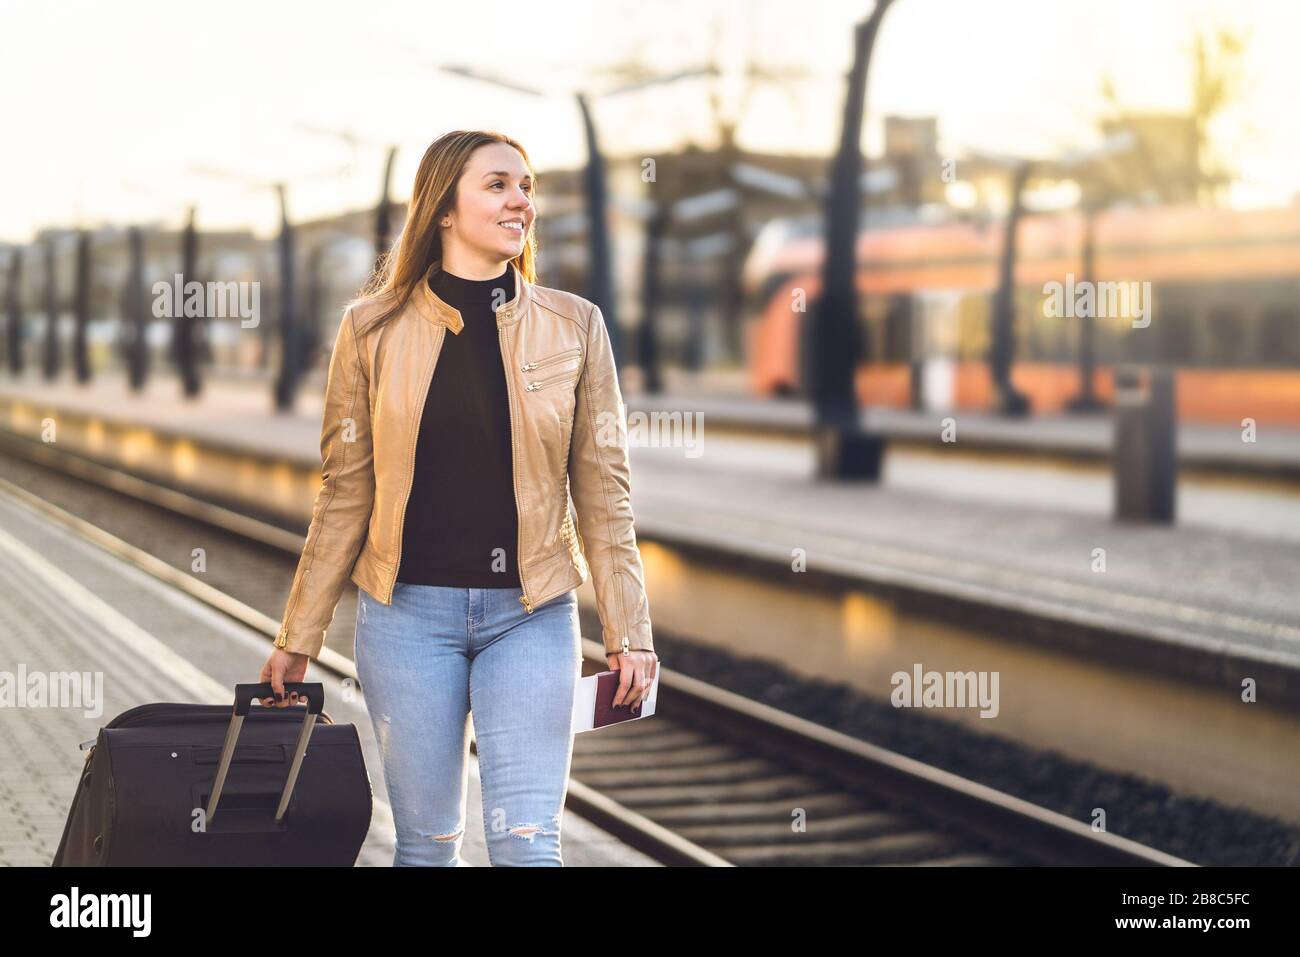 Lady pulling suitcase and luggage in train station. Woman walking in platform and holding ticket and passport. Happy female traveler. Stock Photo